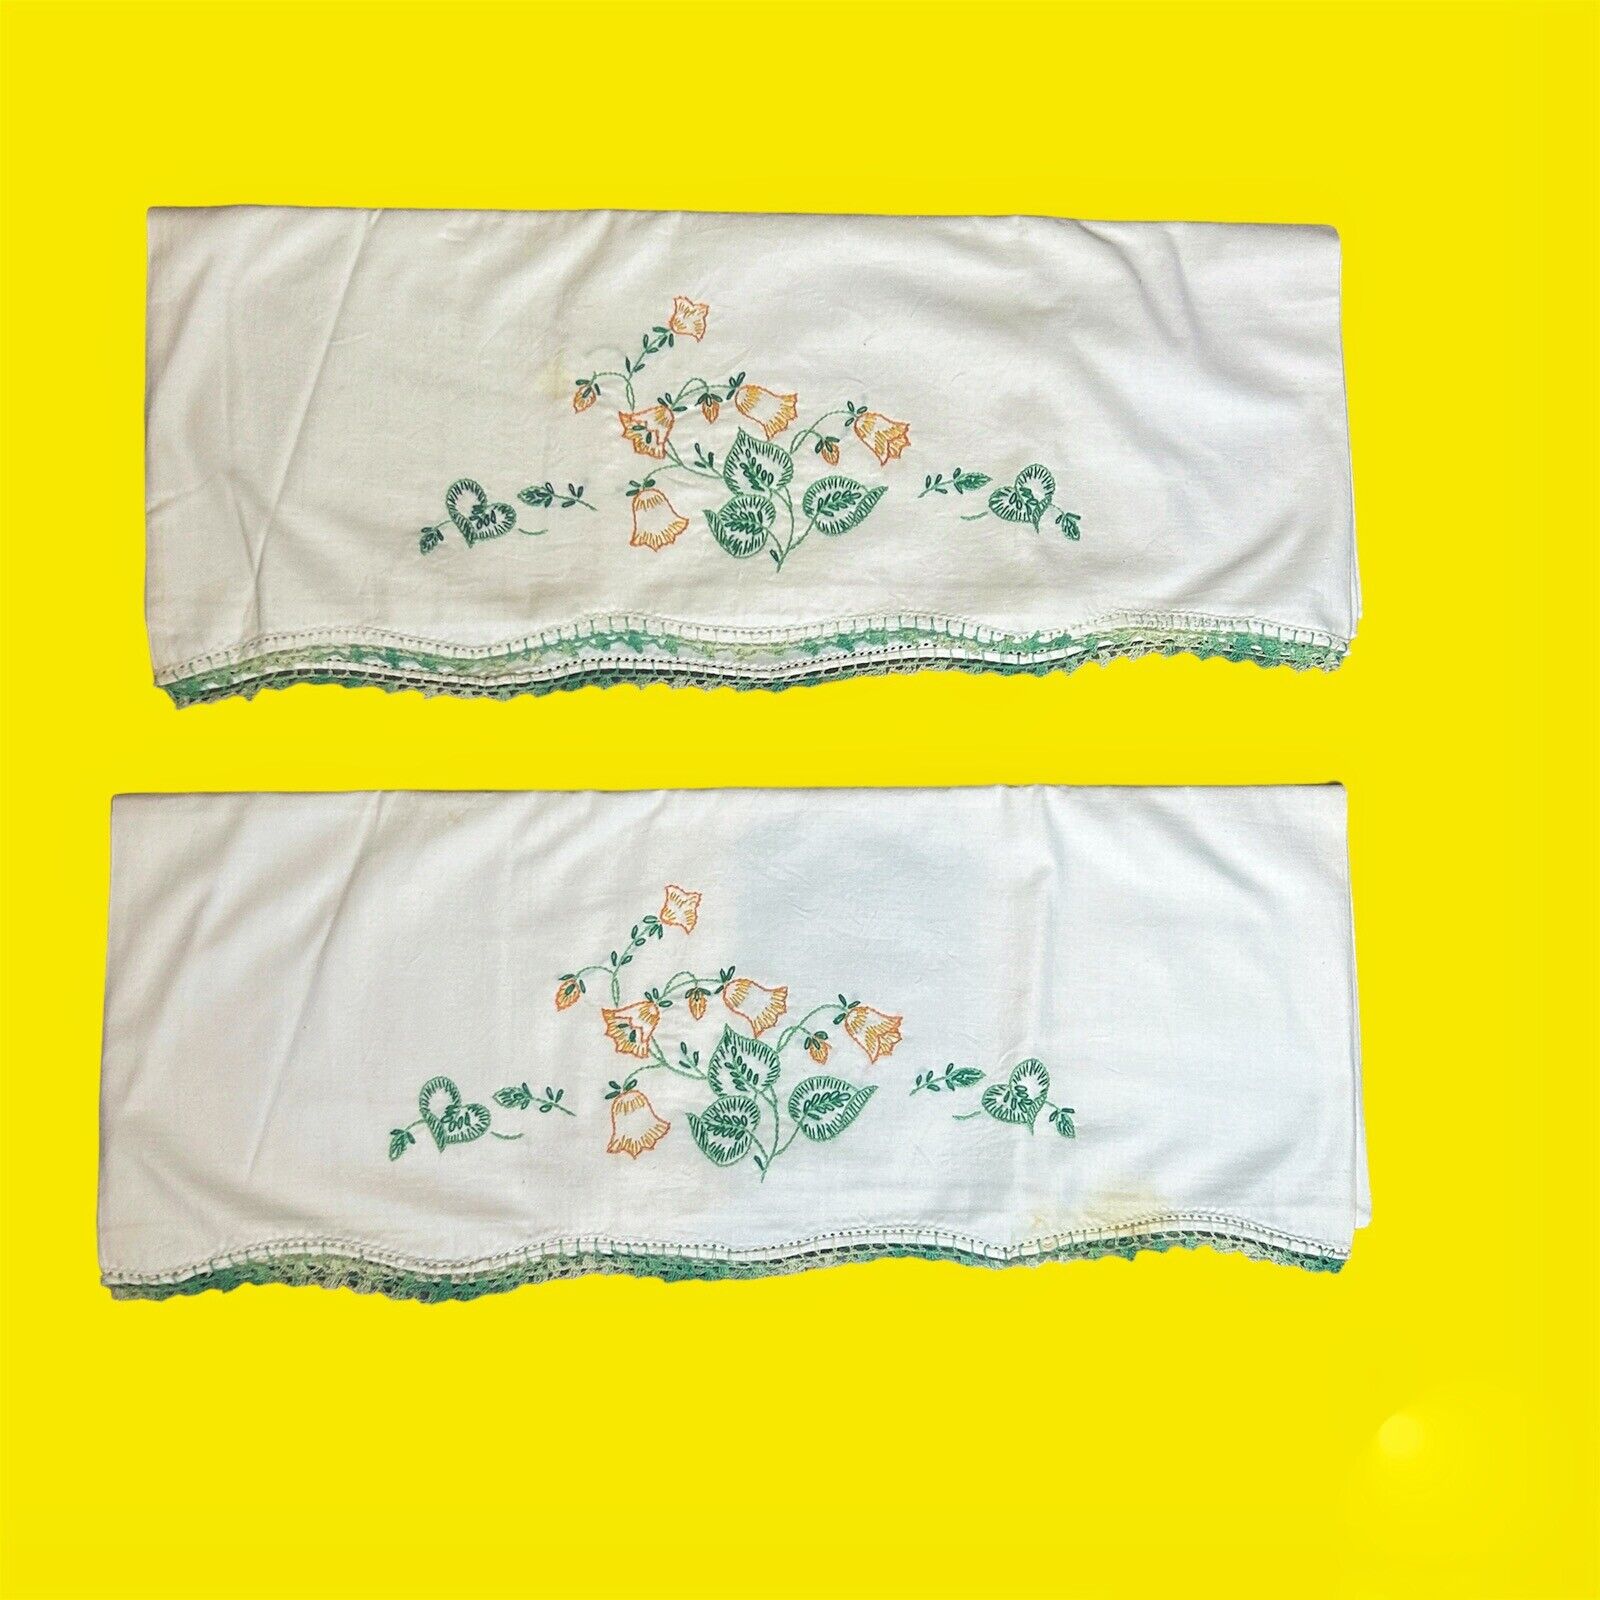 Vintage Yellow Daffodils Embroidered Pillowcases Set of 2 Green Lace Trim